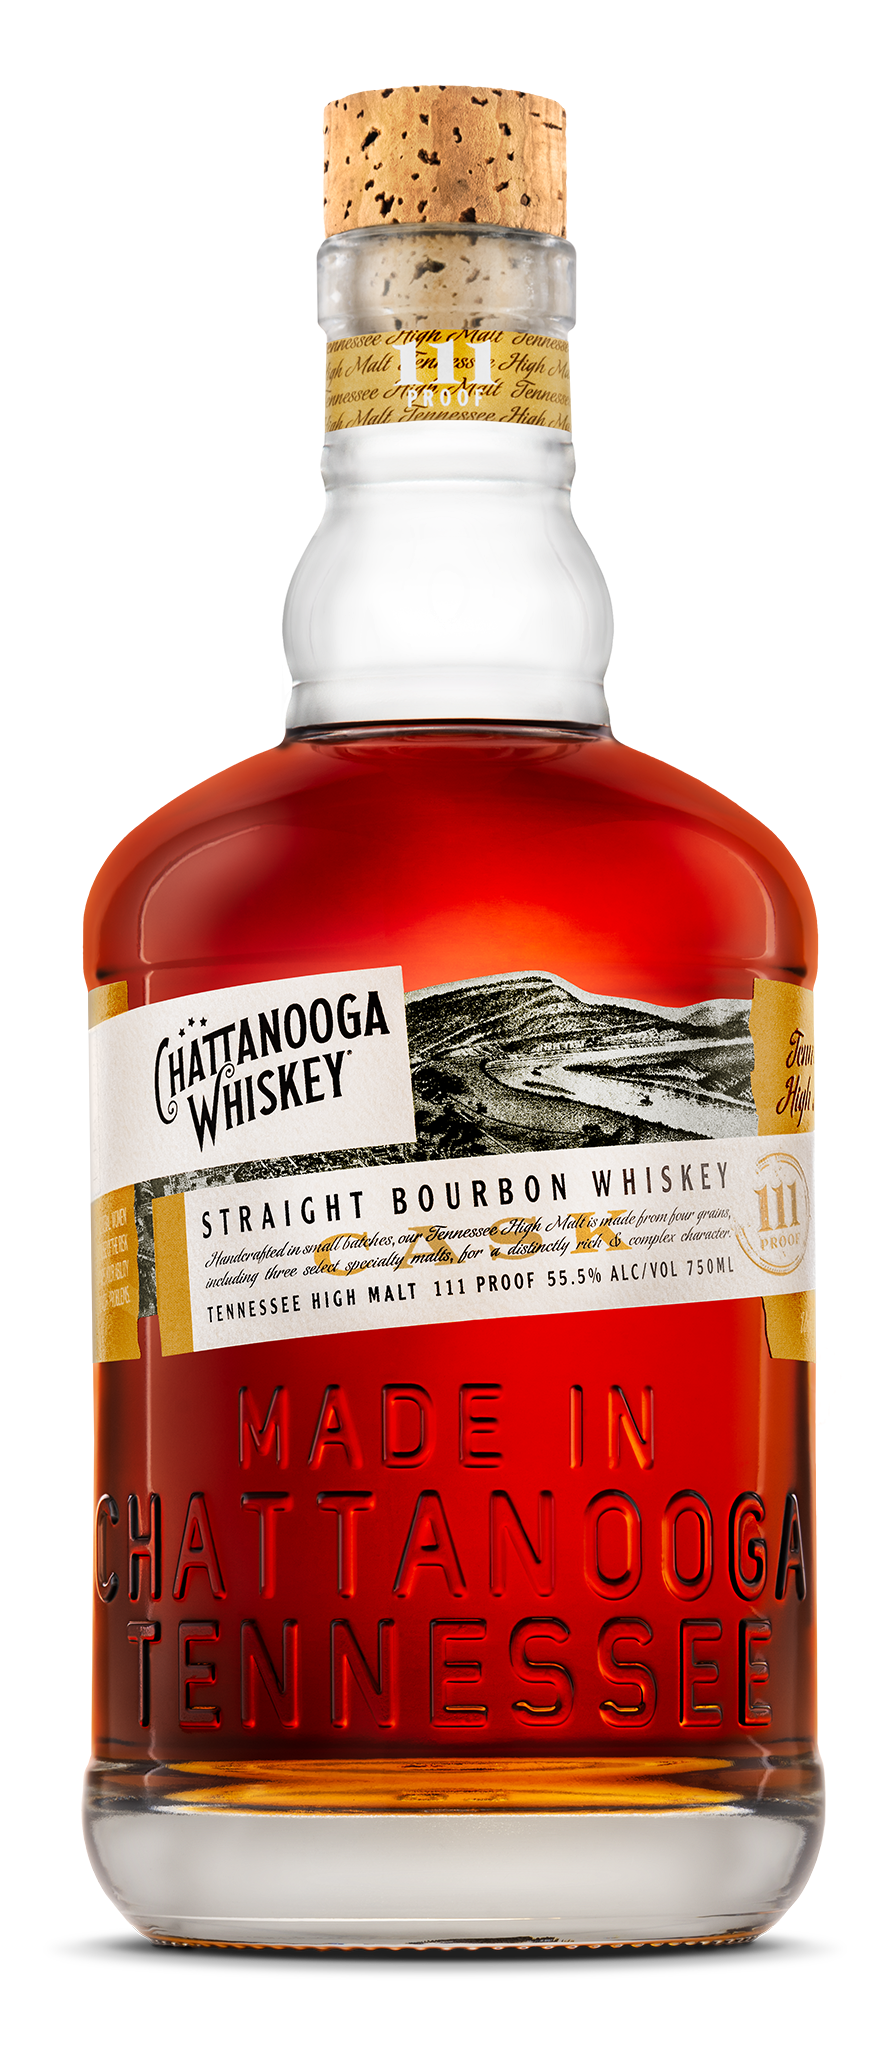 Chattanooga Whiskey Cask 111